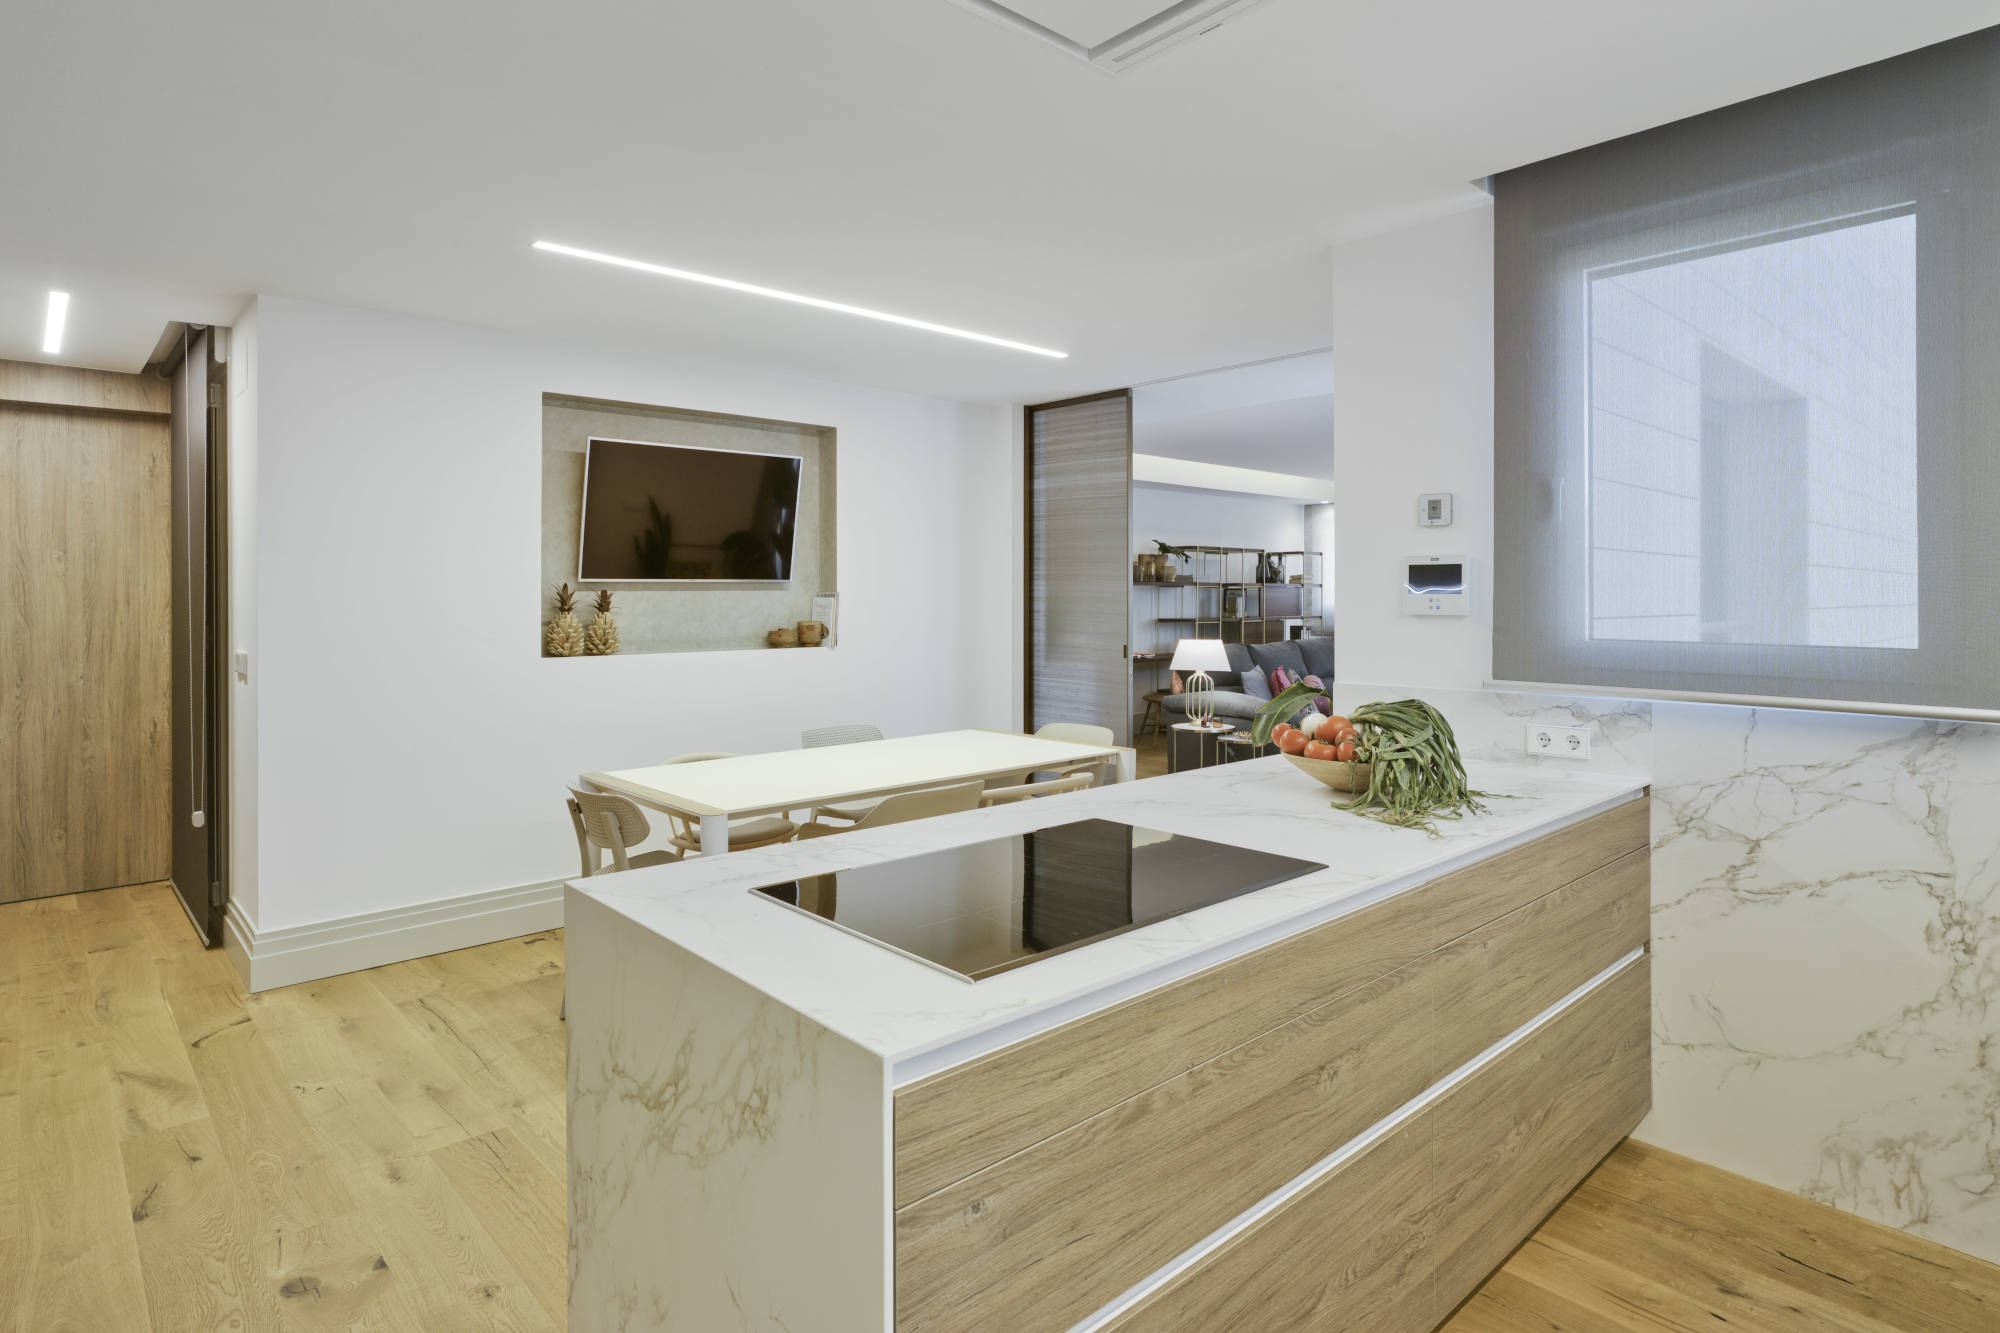 Image of MC2 1 in Spaciousness, functionality and Dekton for the kitchen of this house in Murcia - Cosentino